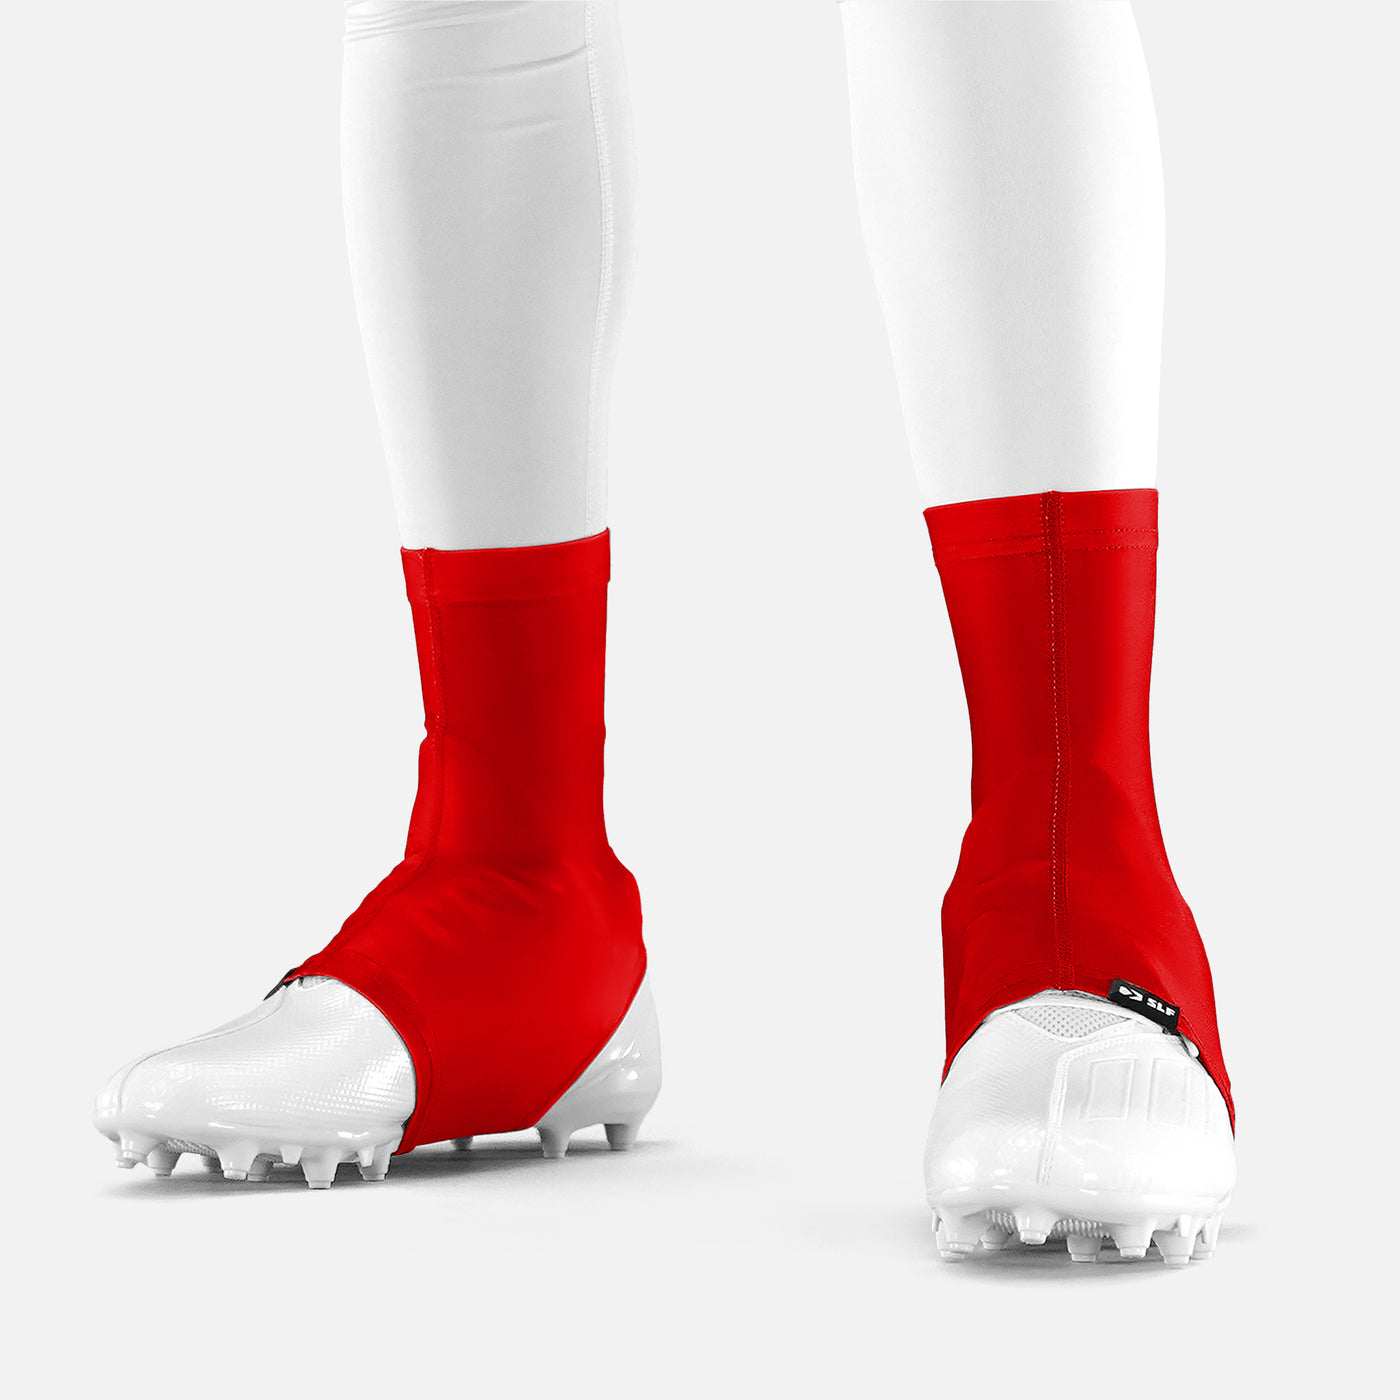 Hue Red Spats / Cleat Covers